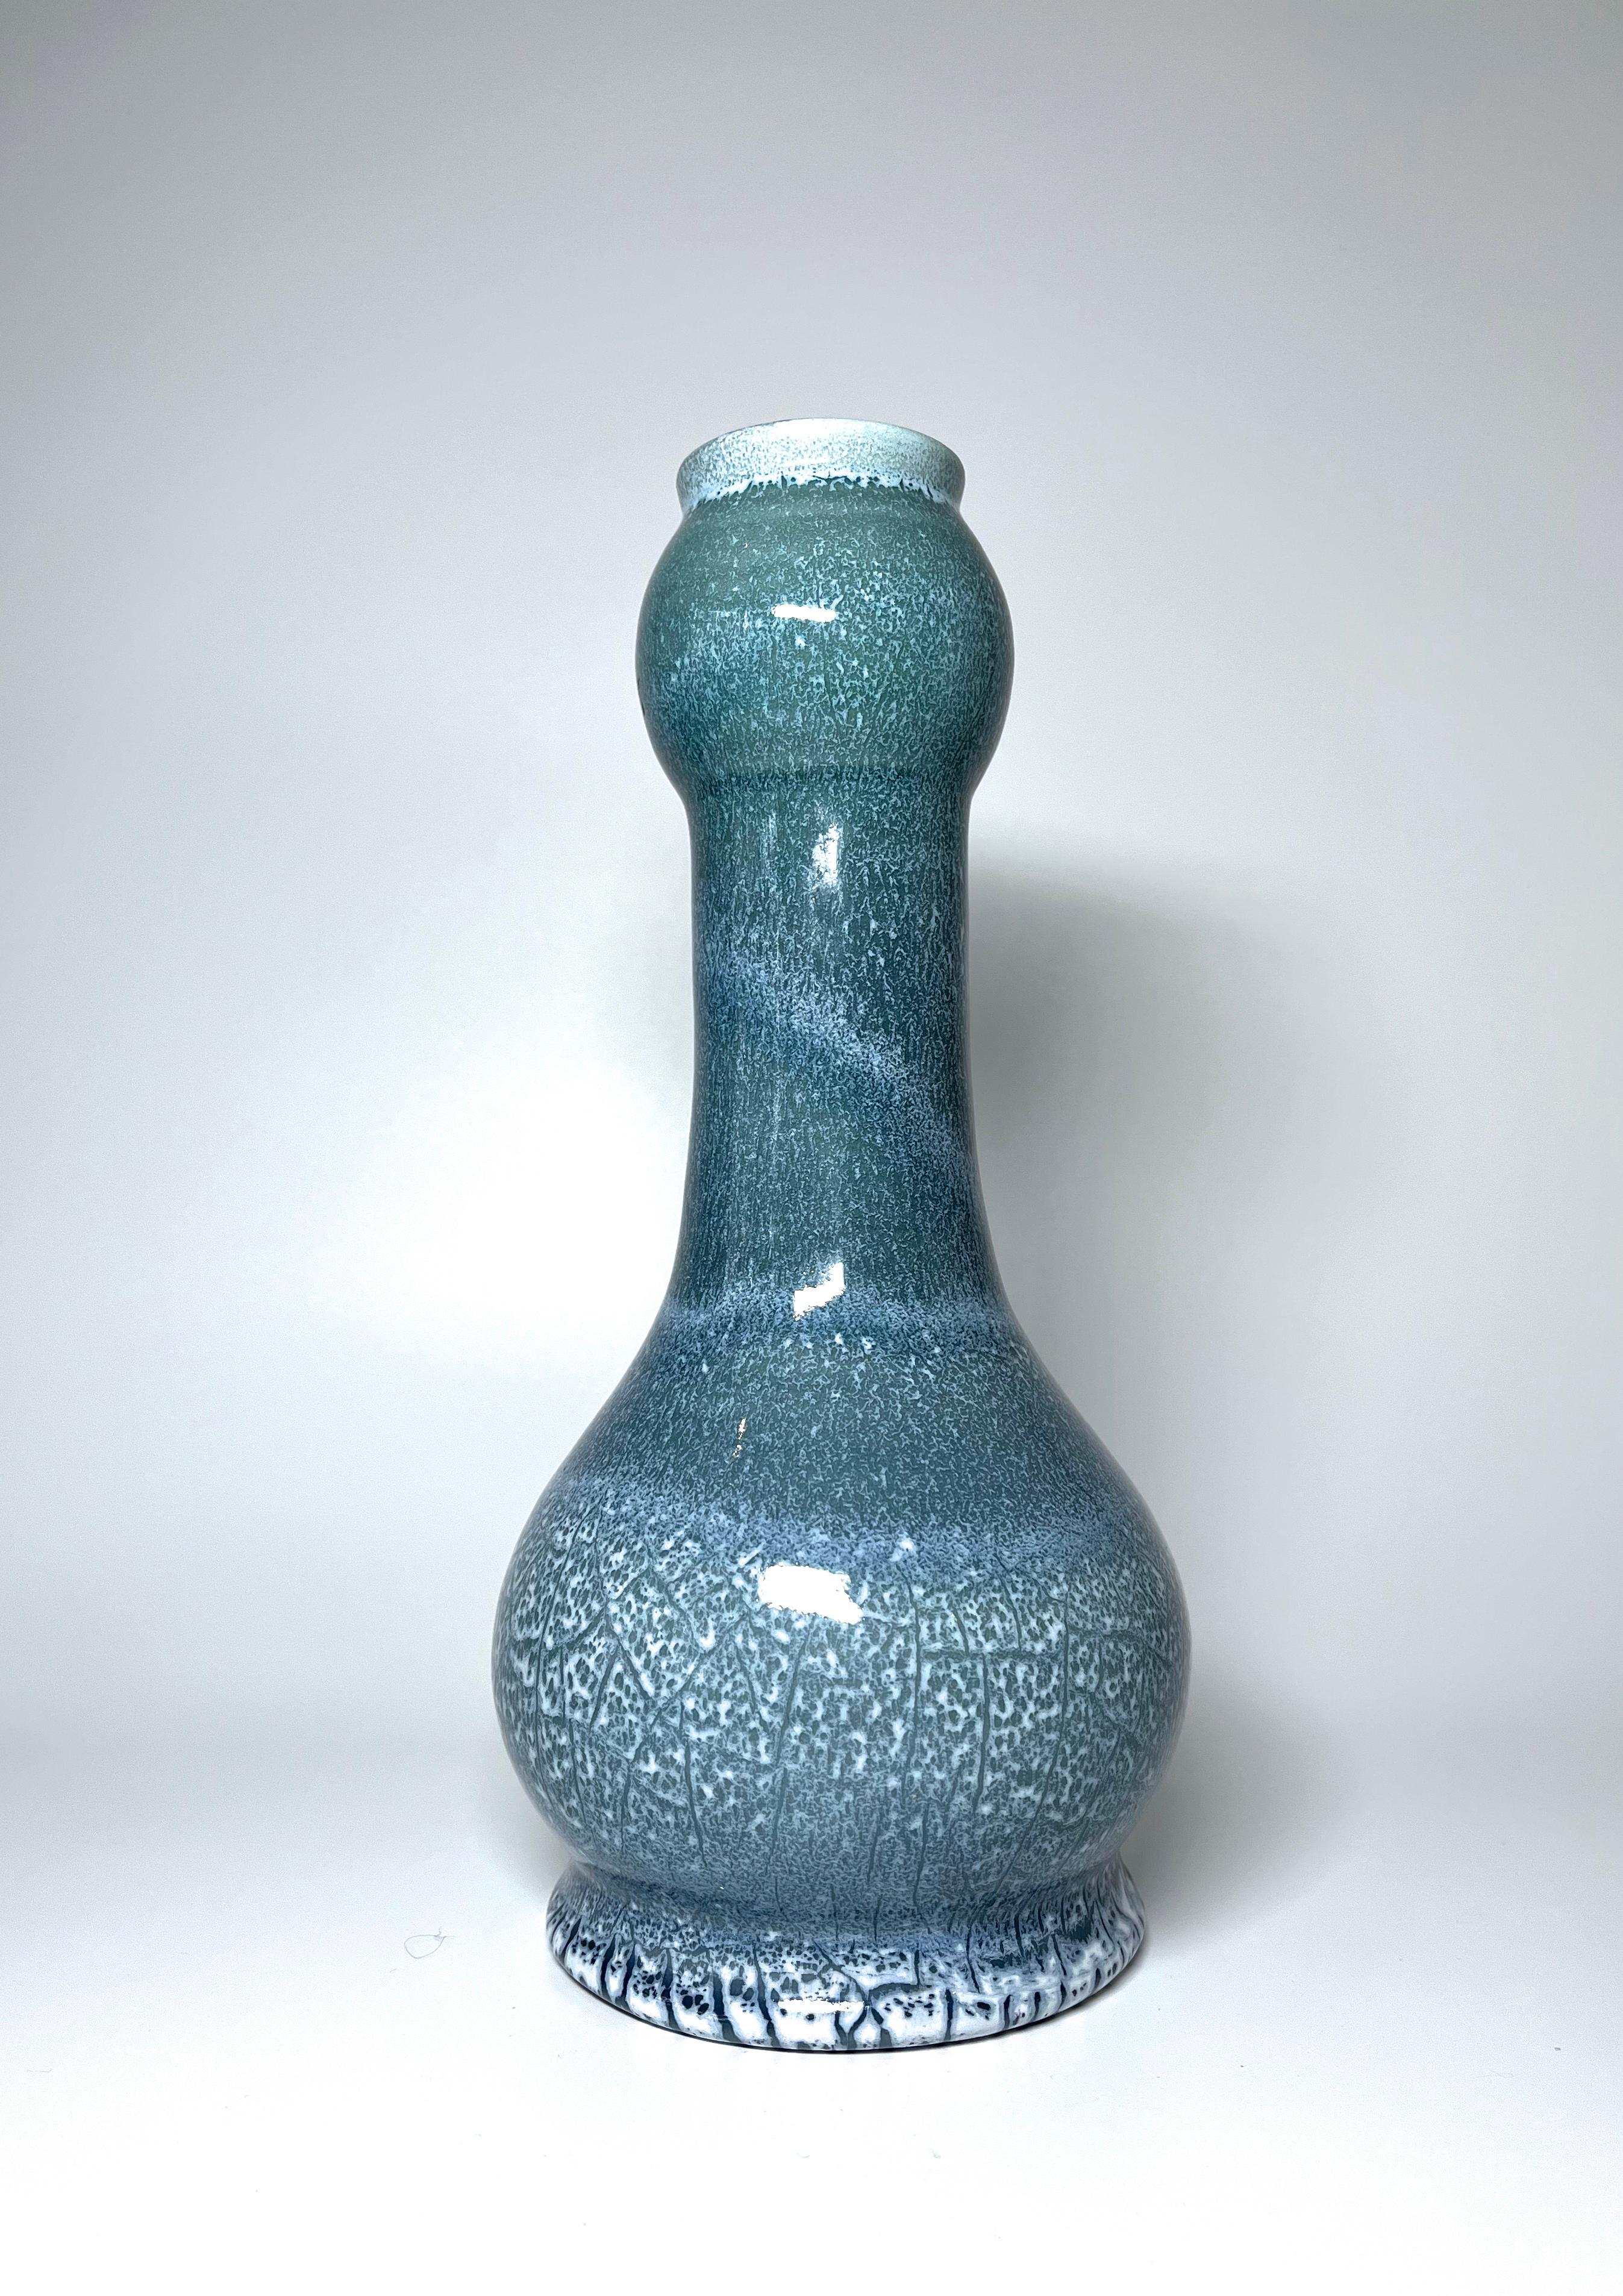 French Superbly Crafted, Hand Thrown Ceramic Vase From Accolay, France 1960's For Sale